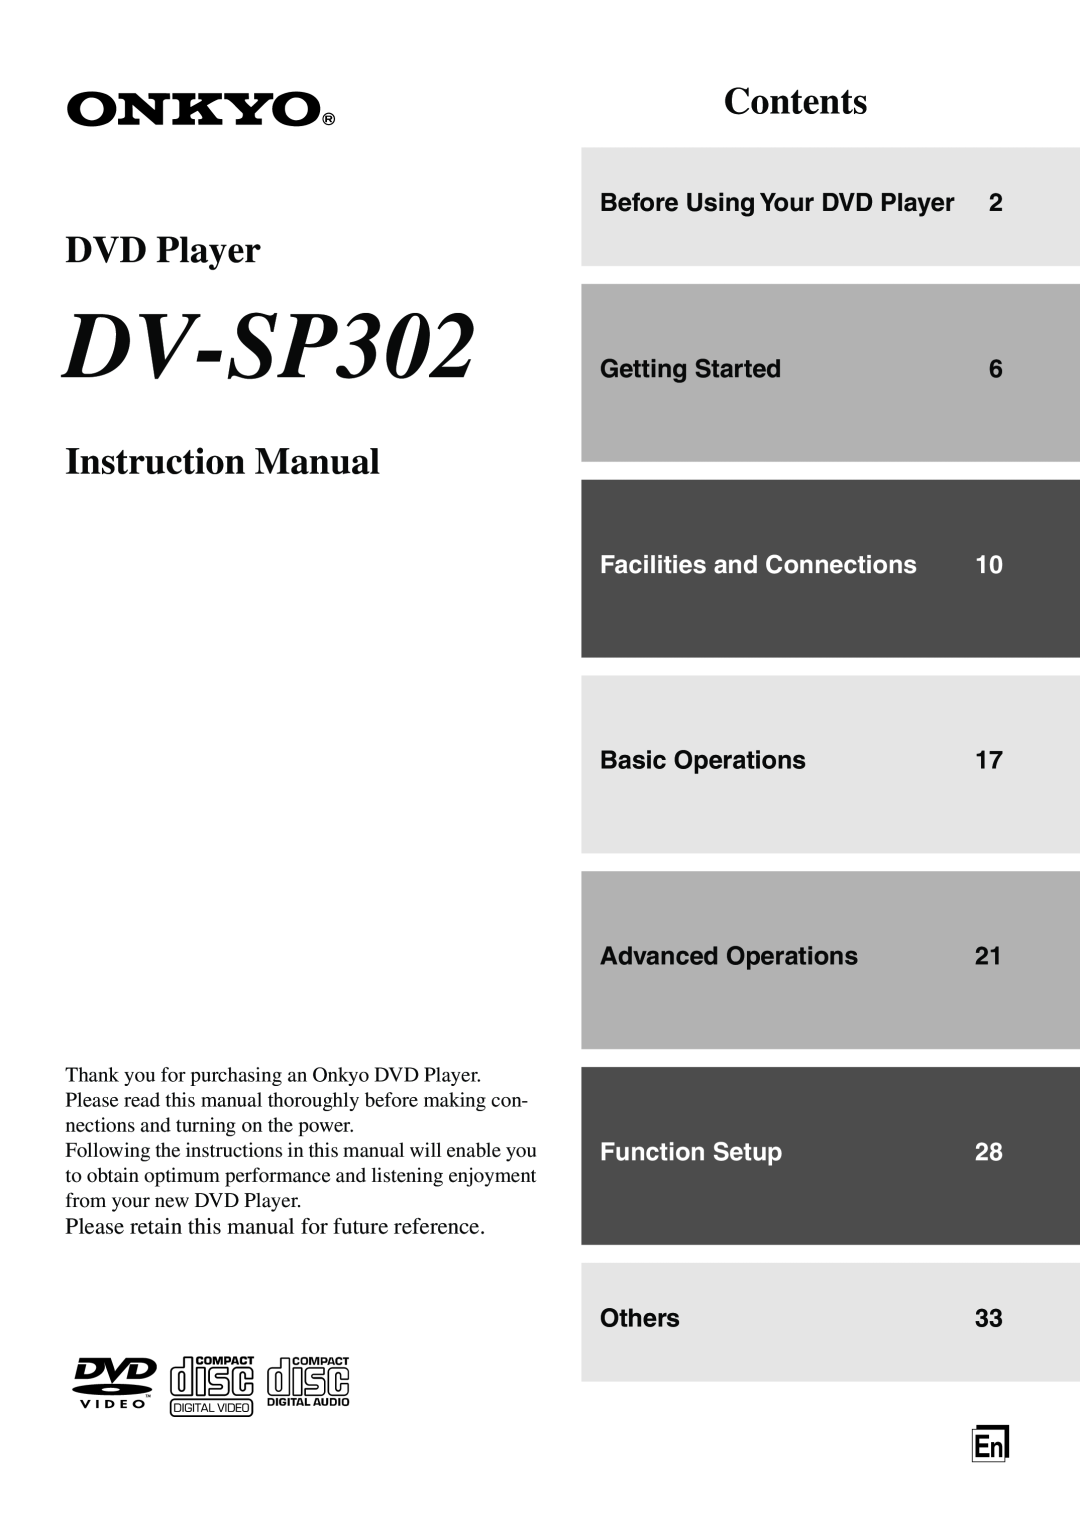 Onkyo DV-SP302 instruction manual Before Using Your DVD Player, Getting Started, Facilities and Connections, Others33 